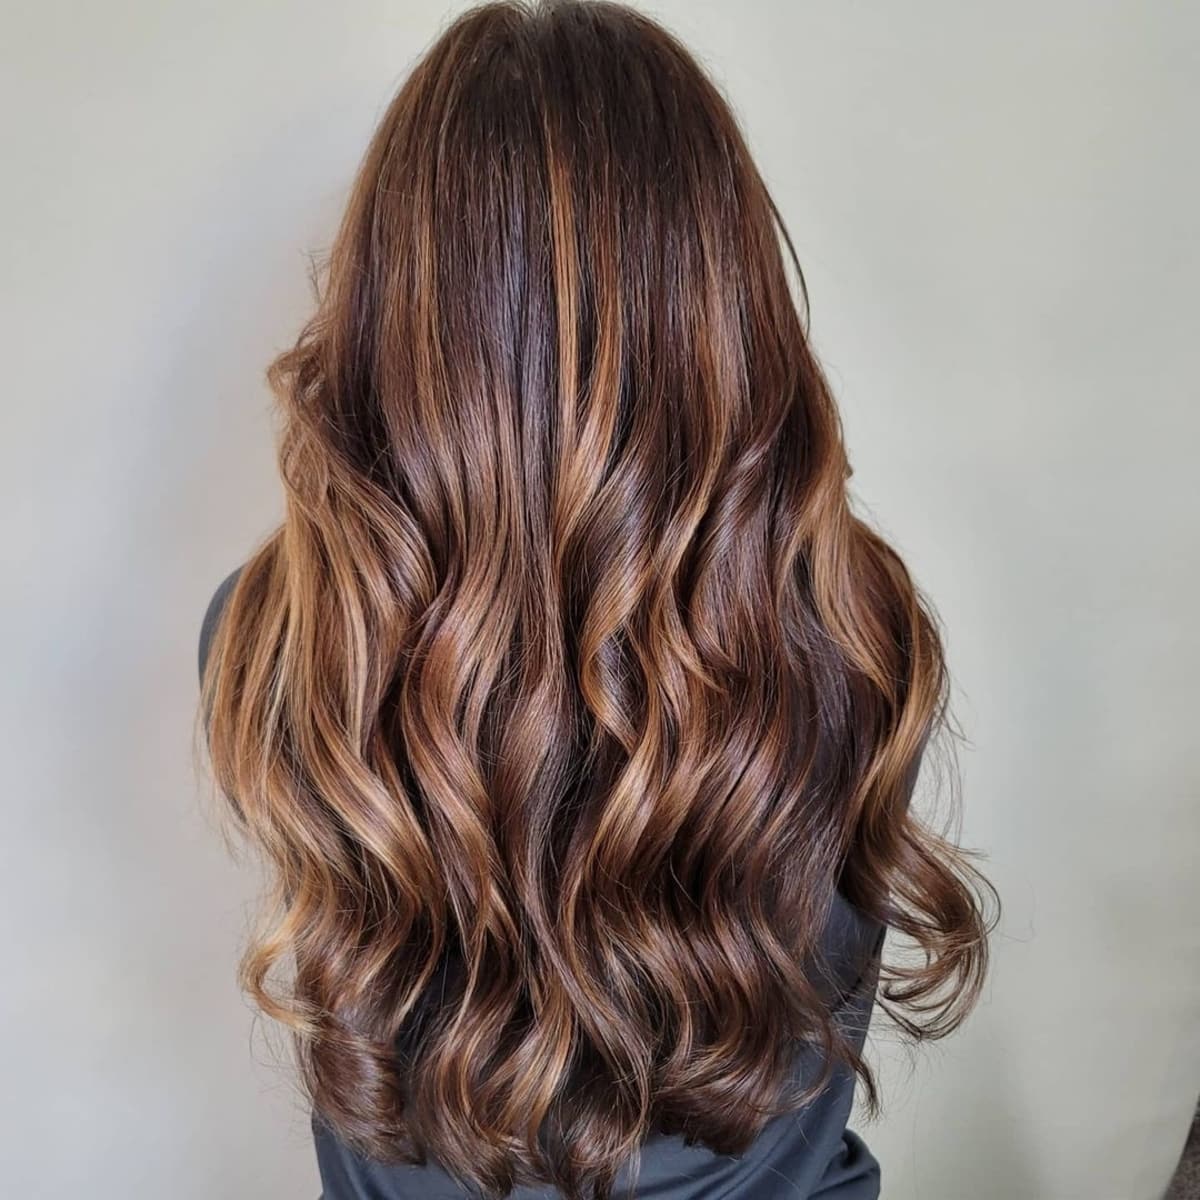 Deep chestnut hair with blonde accents